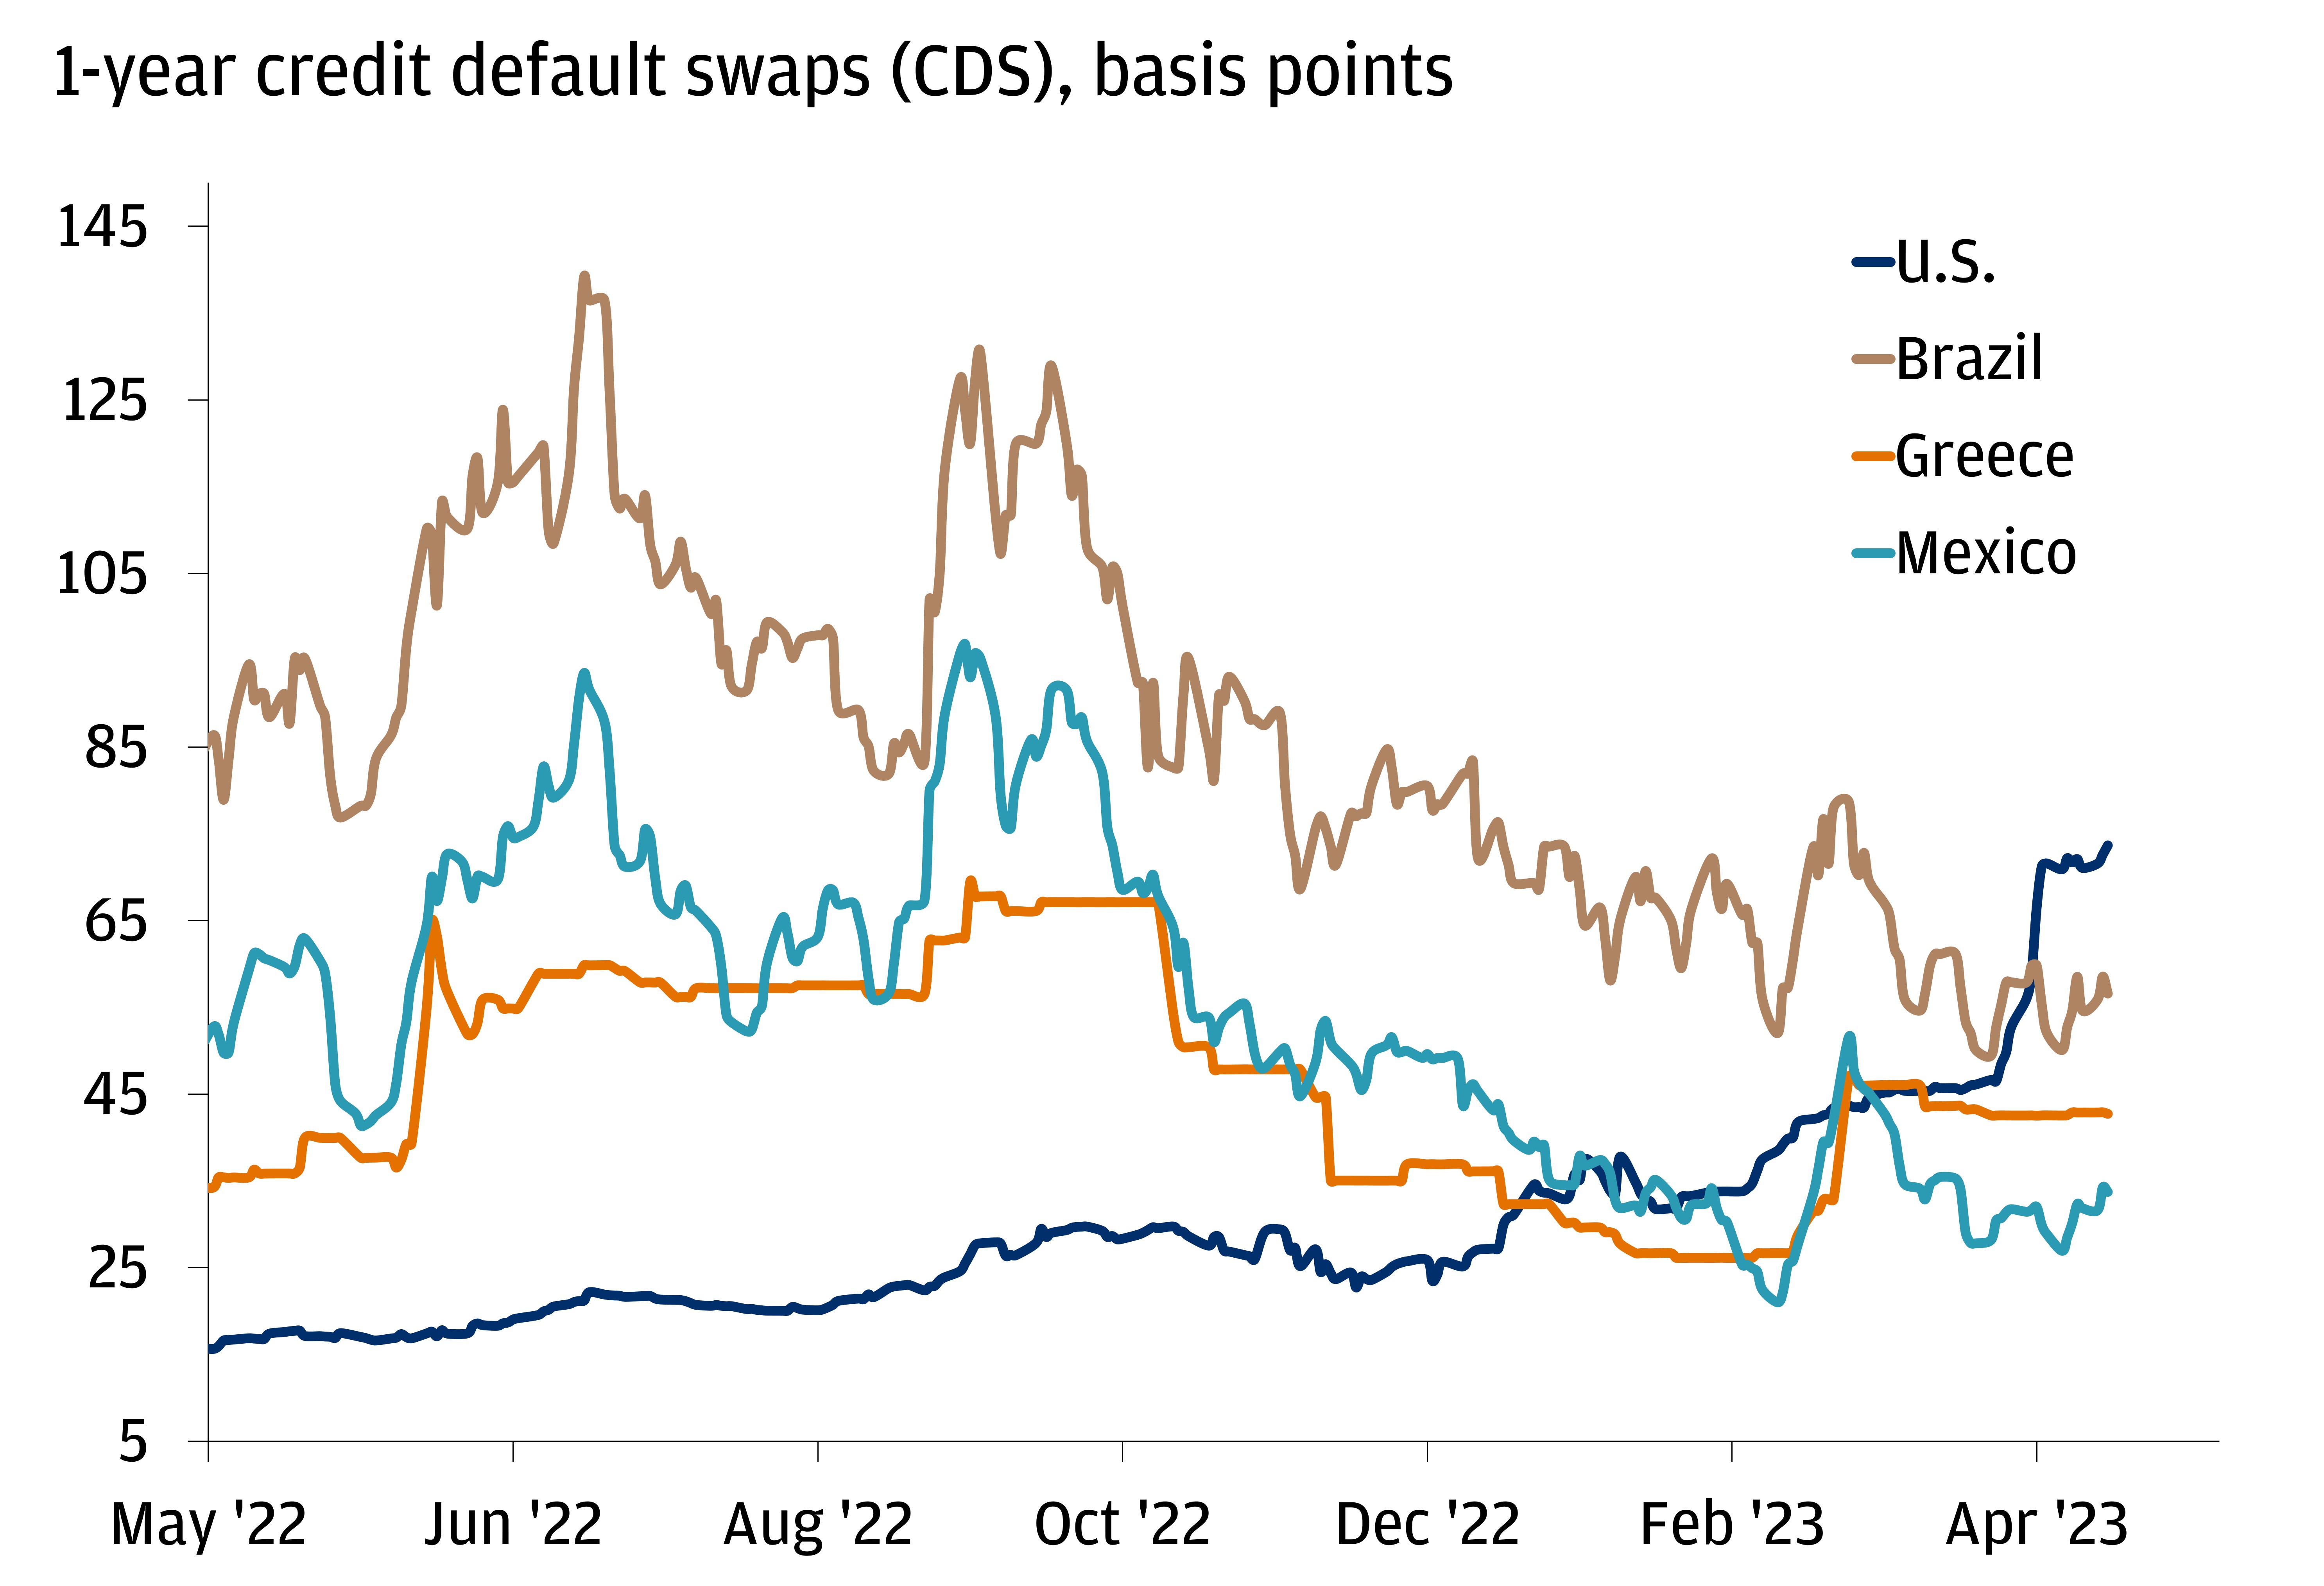 The chart describes U.S. credit risk versus emerging markets using 1-year credit default swaps (CDS) in basis points.